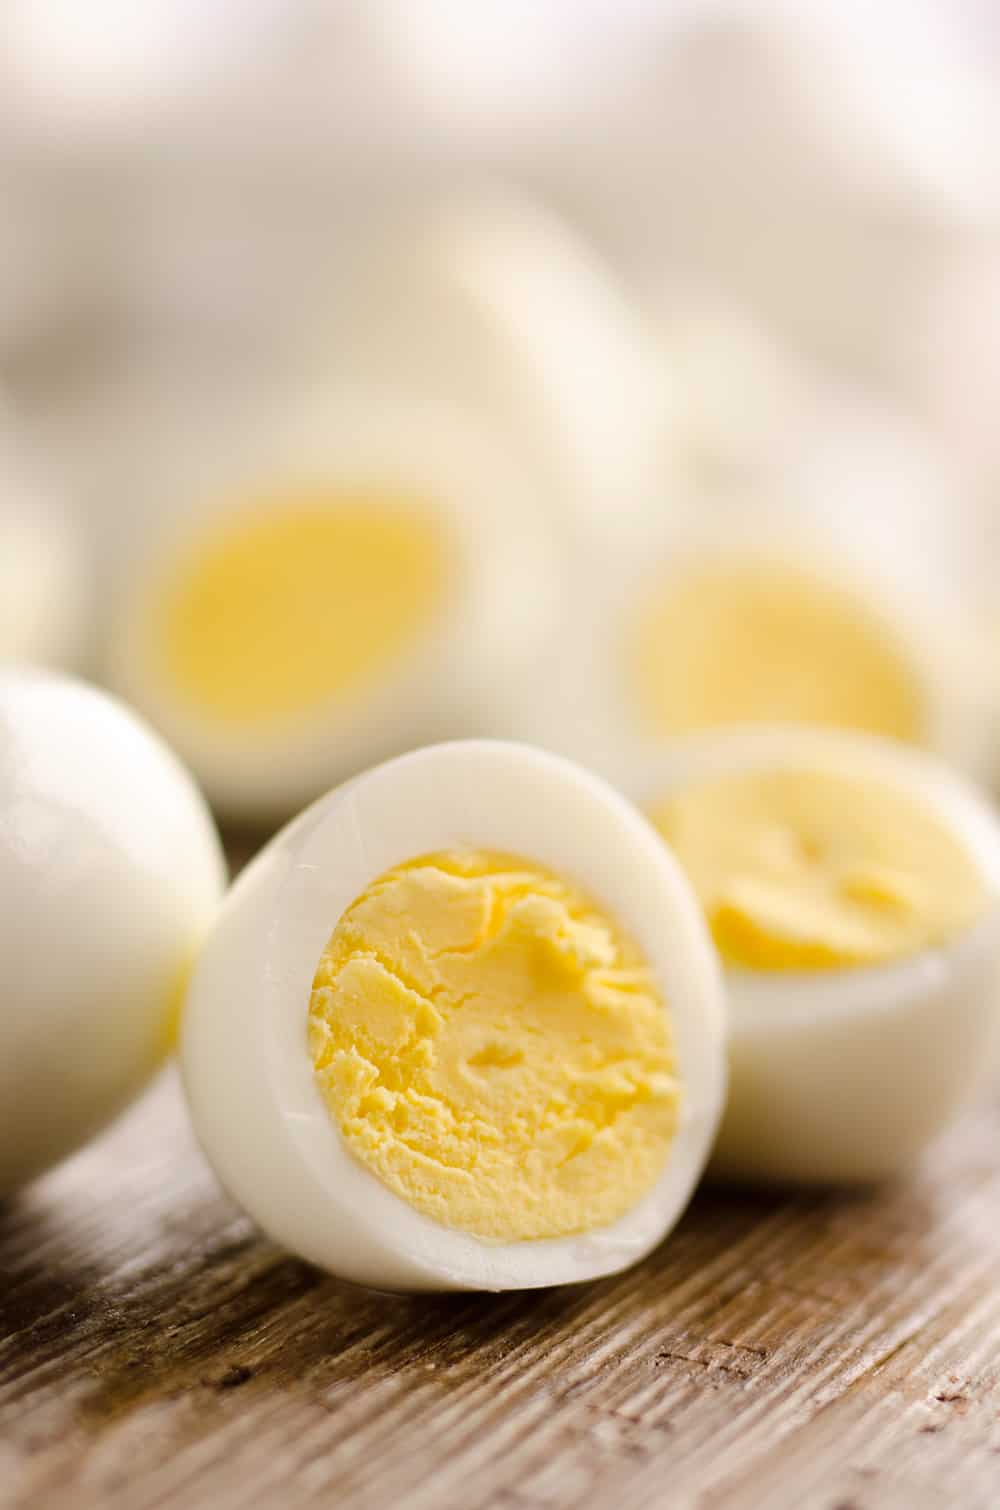 https://www.thecreativebite.com/wp-content/uploads/2017/04/How-to-Make-Perfect-Hard-Boiled-Eggs-Pressure-Cooker-The-Creative-Bite-5-copy.jpg